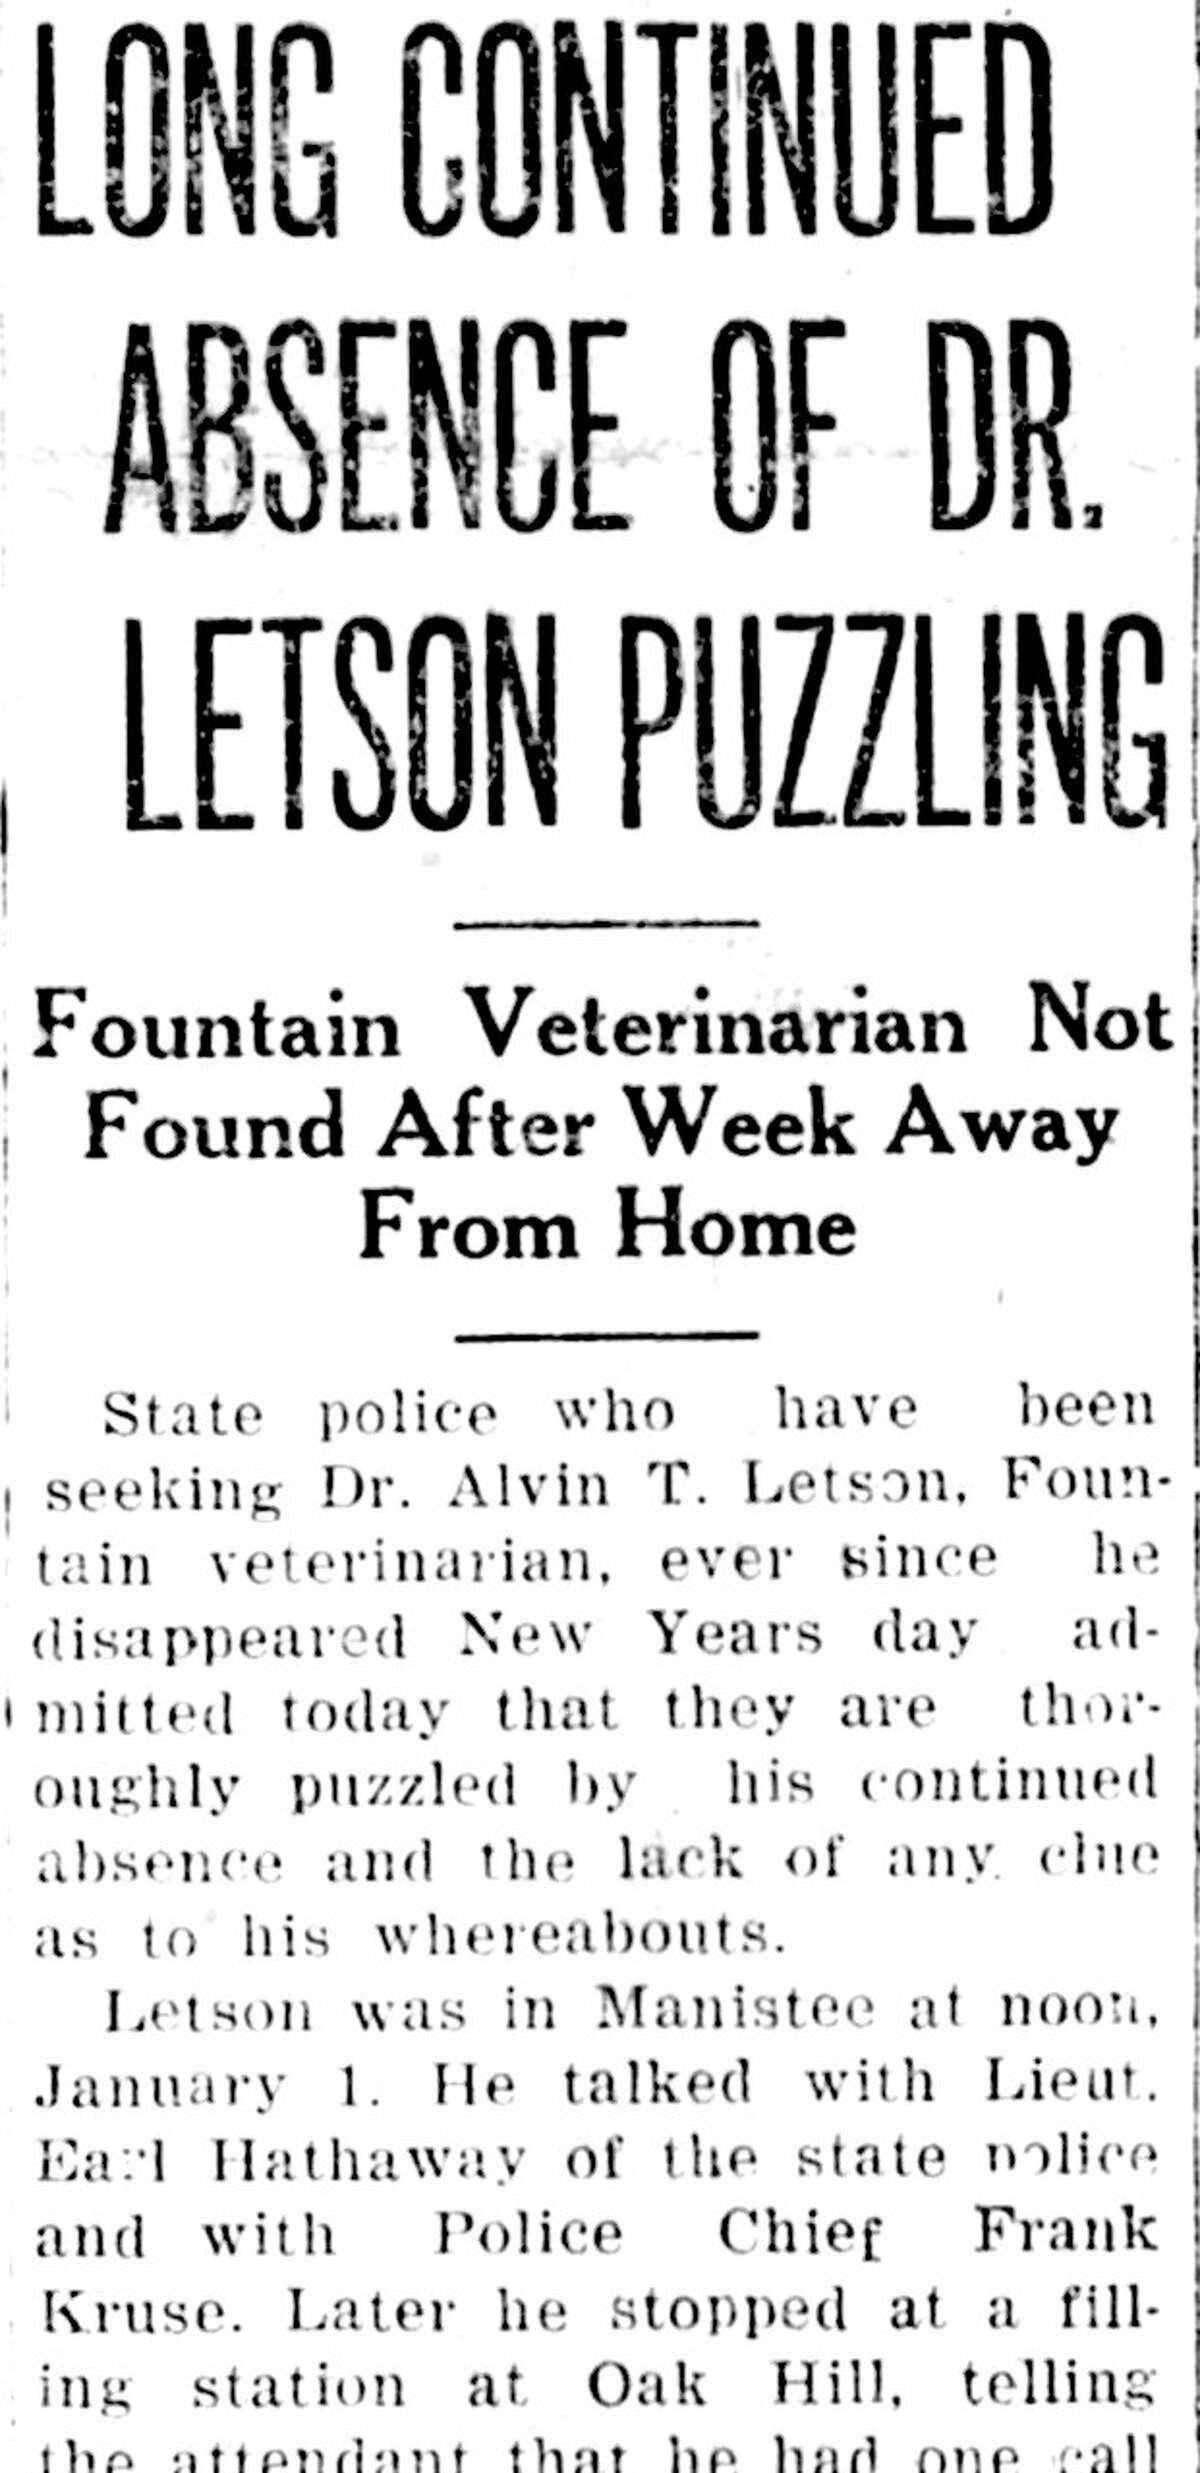 A headline from the front page of the Jan. 10, 1929 issue of the Manistee News Advocate in which the missing Alvin Letson’s whereabouts were still being sought after nine days.